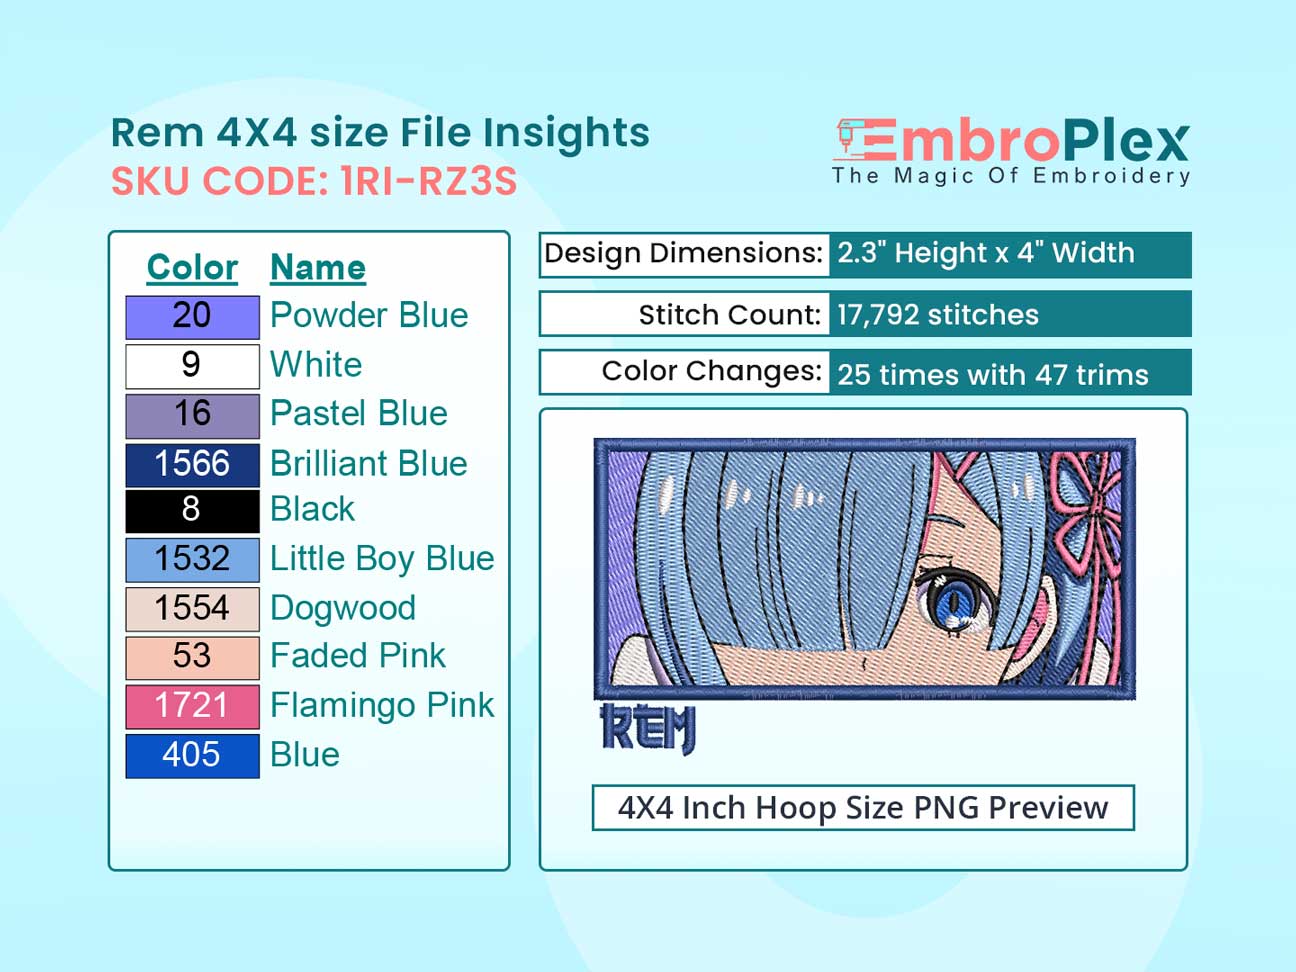 Anime-Inspired Rem Embroidery Design File - 4x4 Inch hoop Size Variation overview image